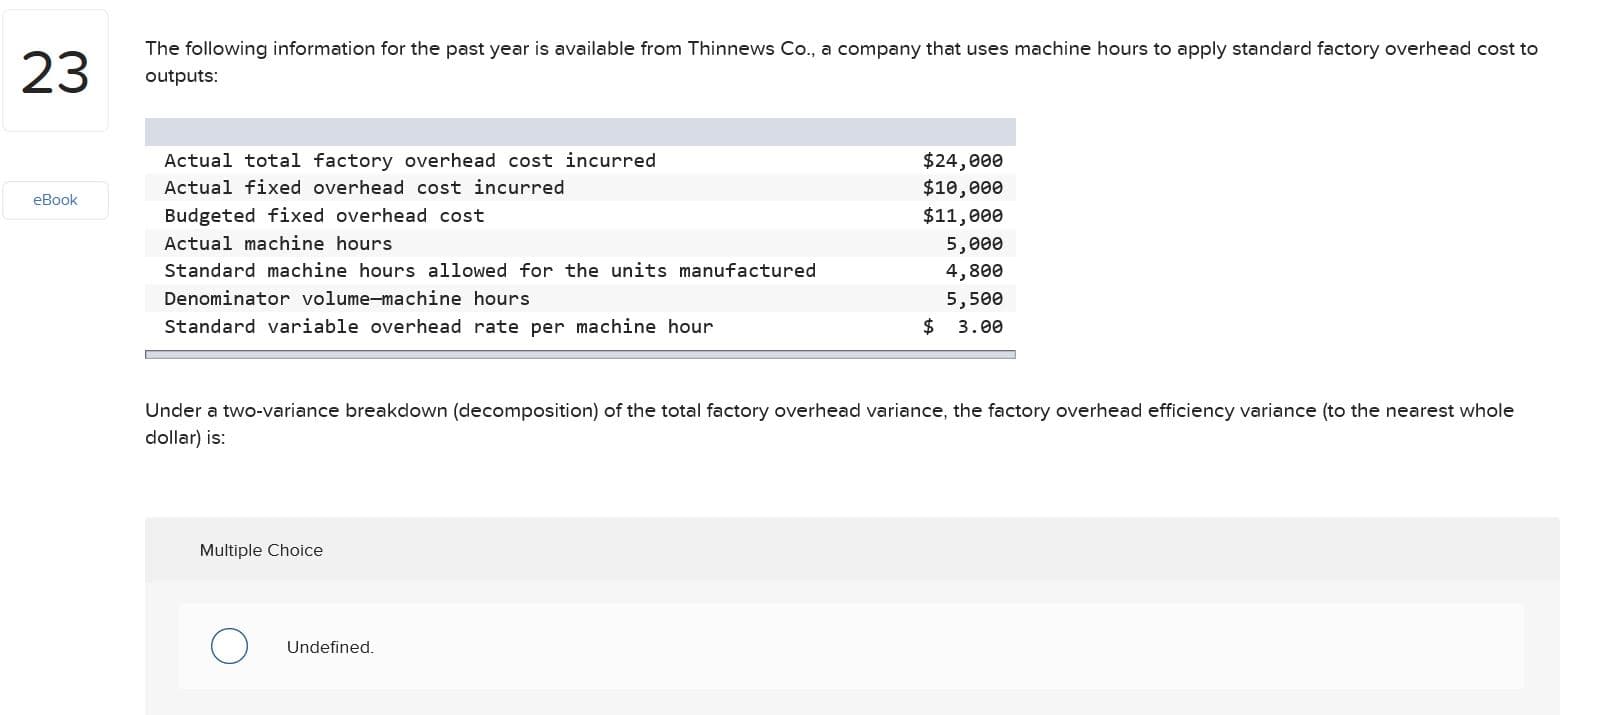 The following information for the past year is available from Thinnews Co., a company that uses machine hours to apply standard factory overhead cost to
23
outputs:
$24,000
$10,000
$11,000
Actual total factory overhead cost incurred
Actual fixed overhead cost incurred
eBook
Budgeted fixed overhead cost
Actual machine hours
5,000
Standard machine hours allowed for the units manufactured
4,800
Denominator volume-machine hours
5,500
$ 3.00
Standard variable overhead rate per machine hour
Under a two-variance breakdown (decomposition) of the total factory overhead variance, the factory overhead efficiency variance (to the nearest whole
dollar) is:
Multiple Choice
Undefined.
